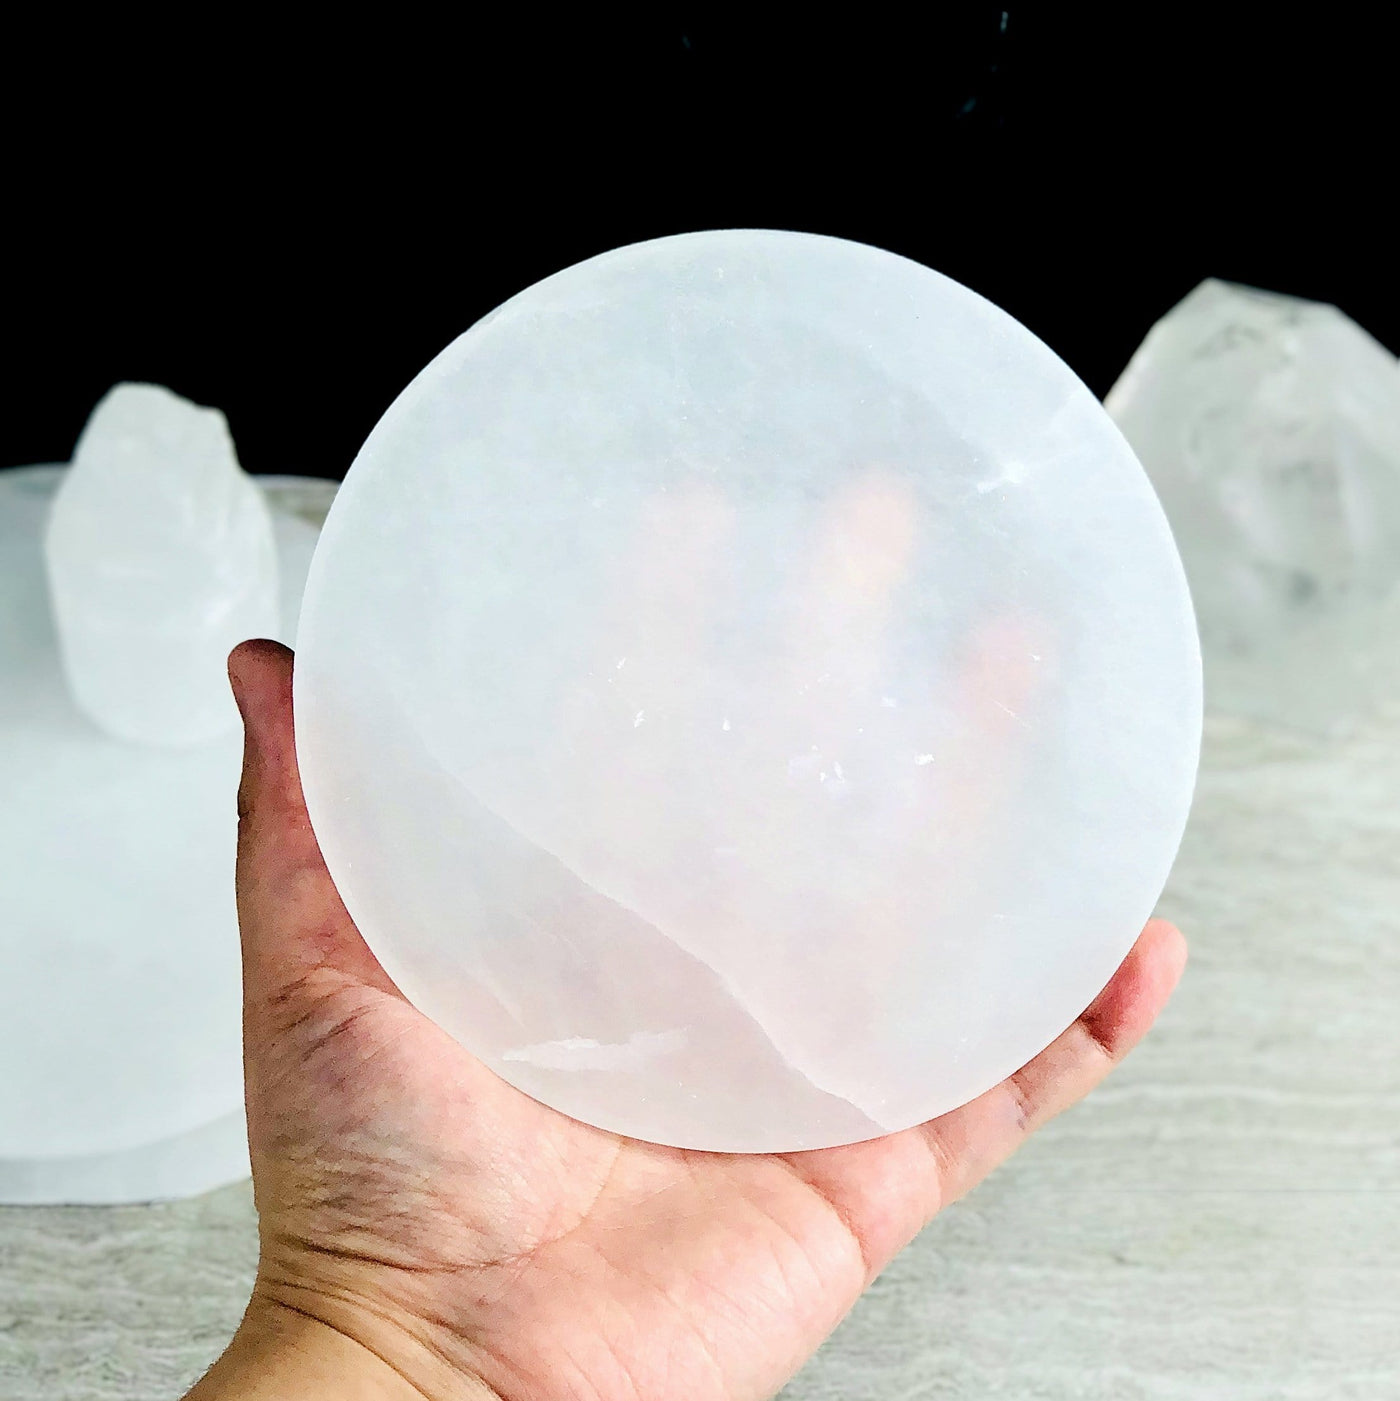 15cm round selenite charging plate in hand for size reference